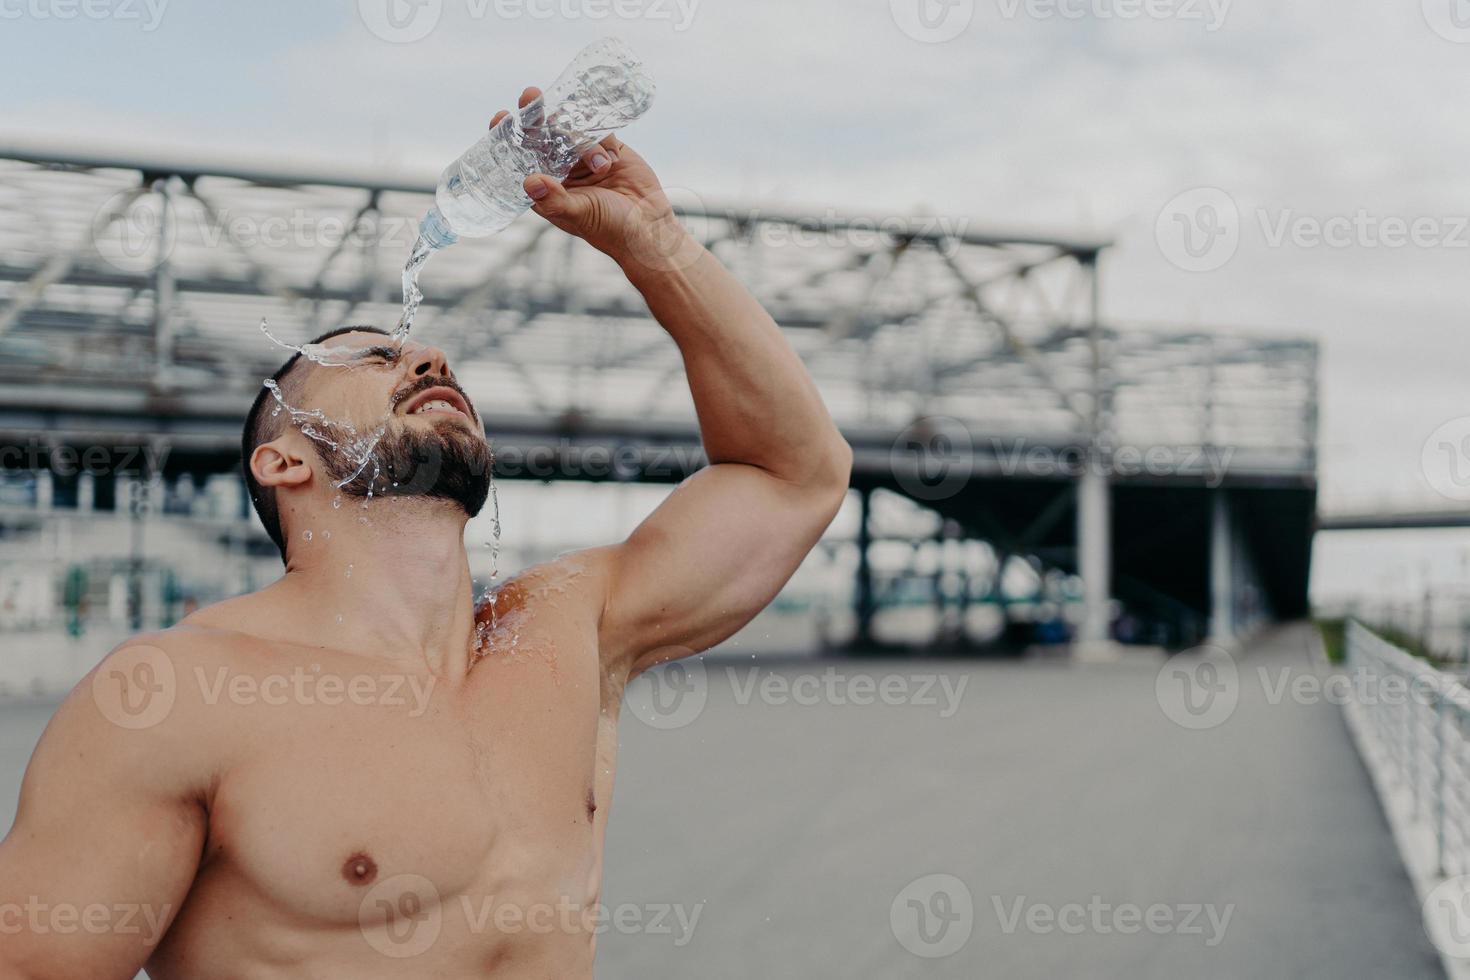 Tired sportsman cools off with fresh water poses with naked torso outdoor, tries to refresh himself, leads active lifestyle, takes break after cardio training. Excercising, refreshment concept photo